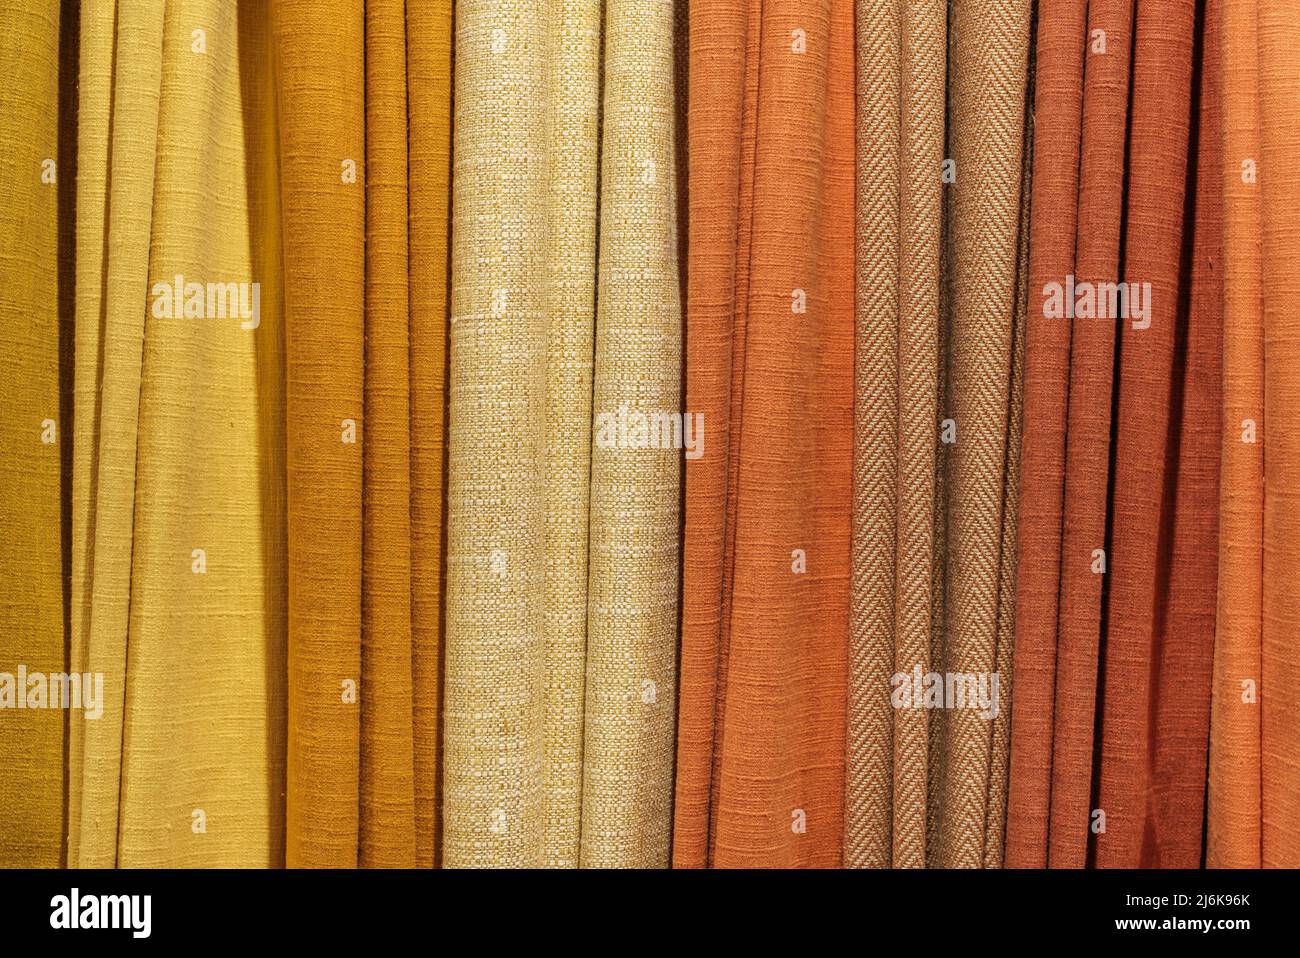 Background Texture Of A Selection Of Multiple Different Warm-Colored Fabric Samples Stock Photo